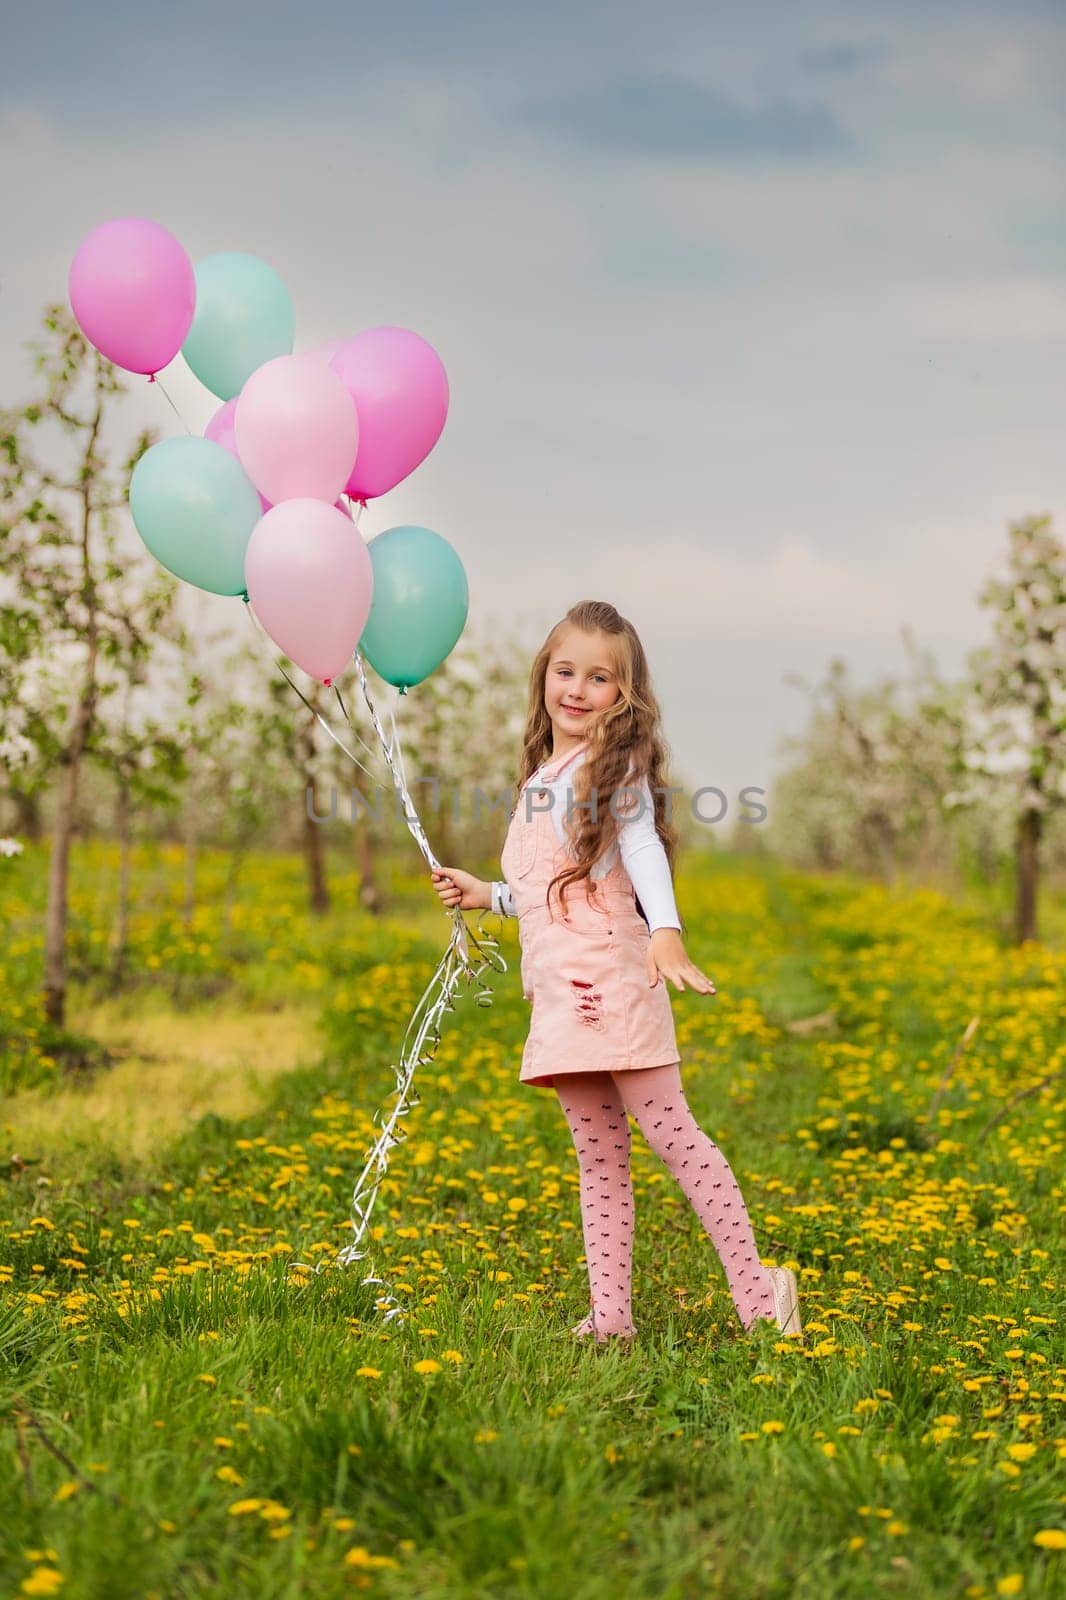 girl with colorful balloons by zokov